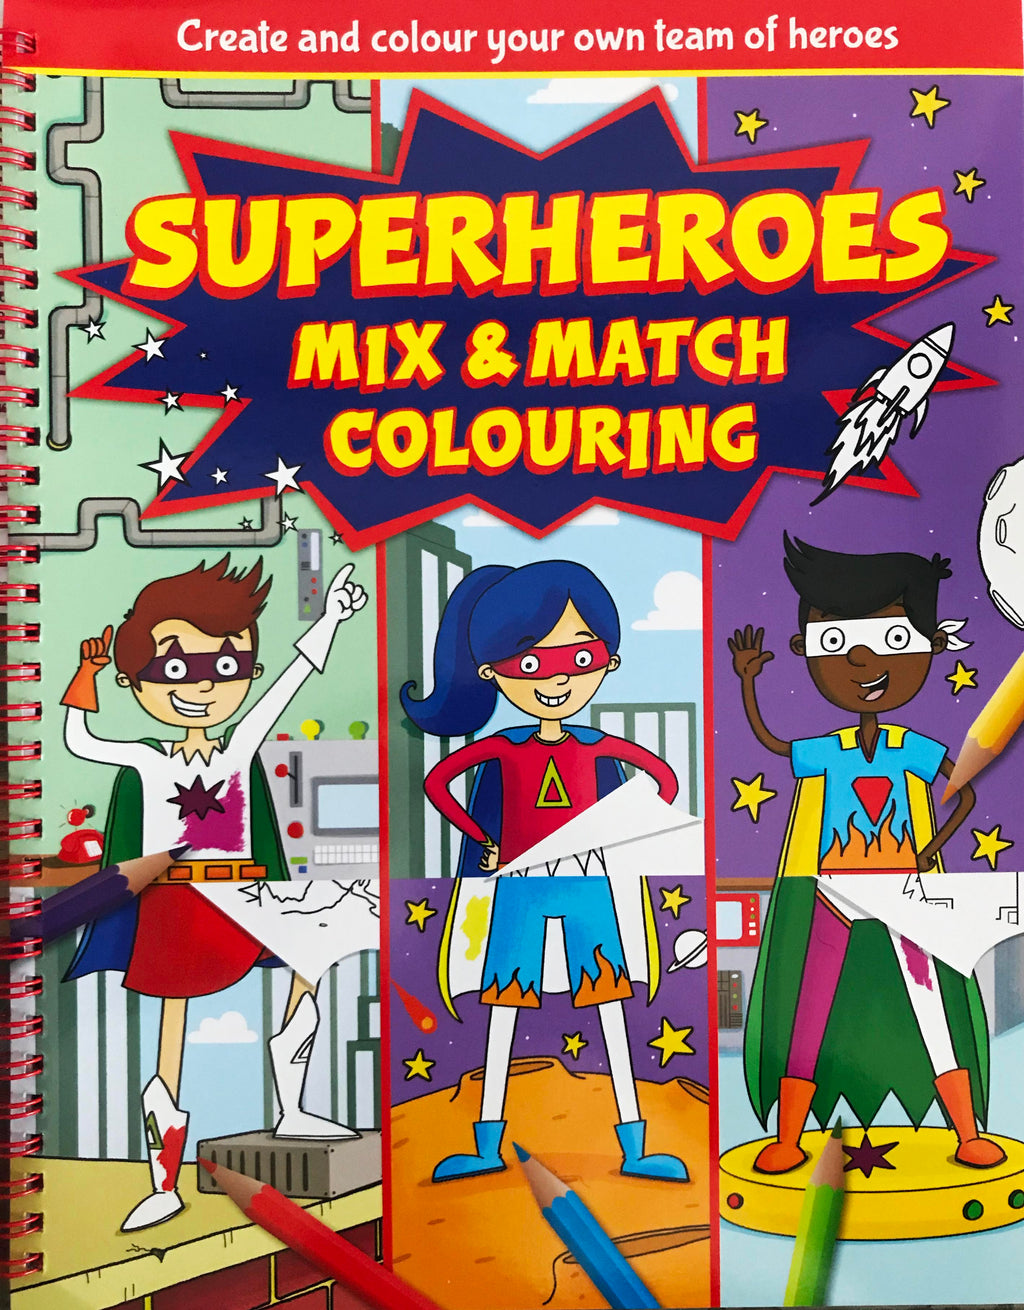 Mix and Match Colouring: Superheroes